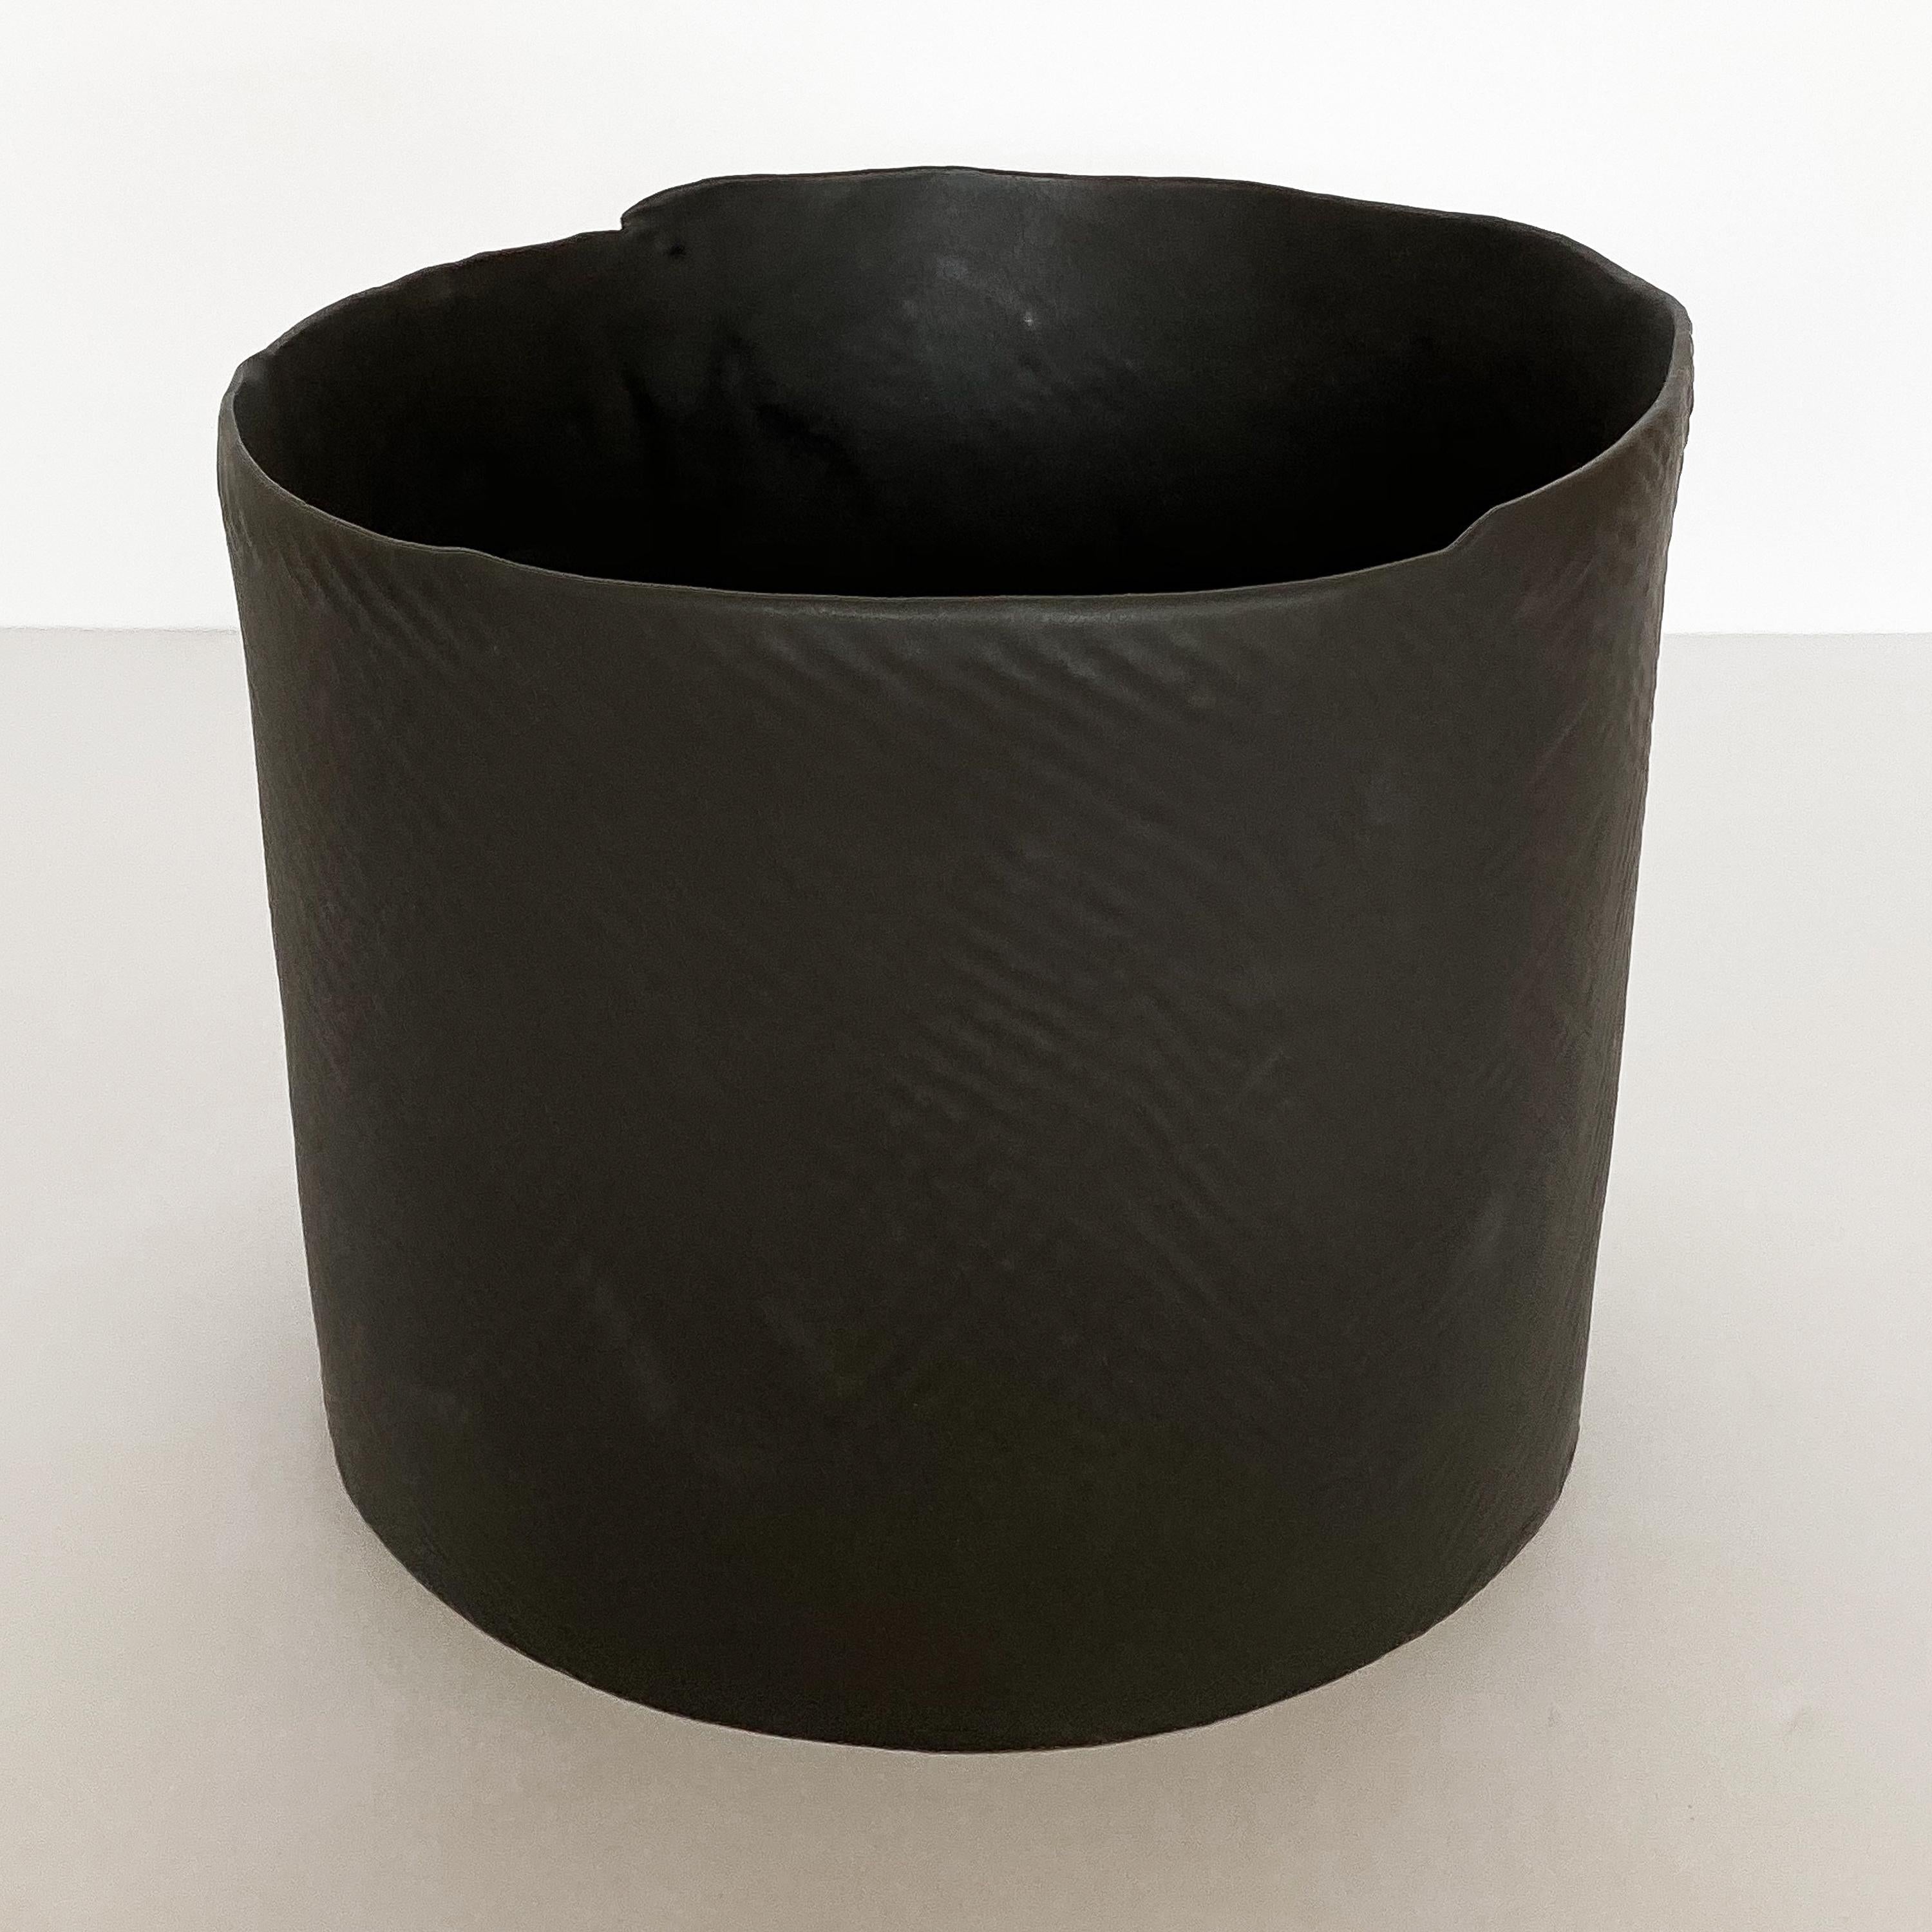 Matte black glazed earthenware bowl with textured exterior by Diana Gillispie. Minimalist and modern in form. Measures: 8